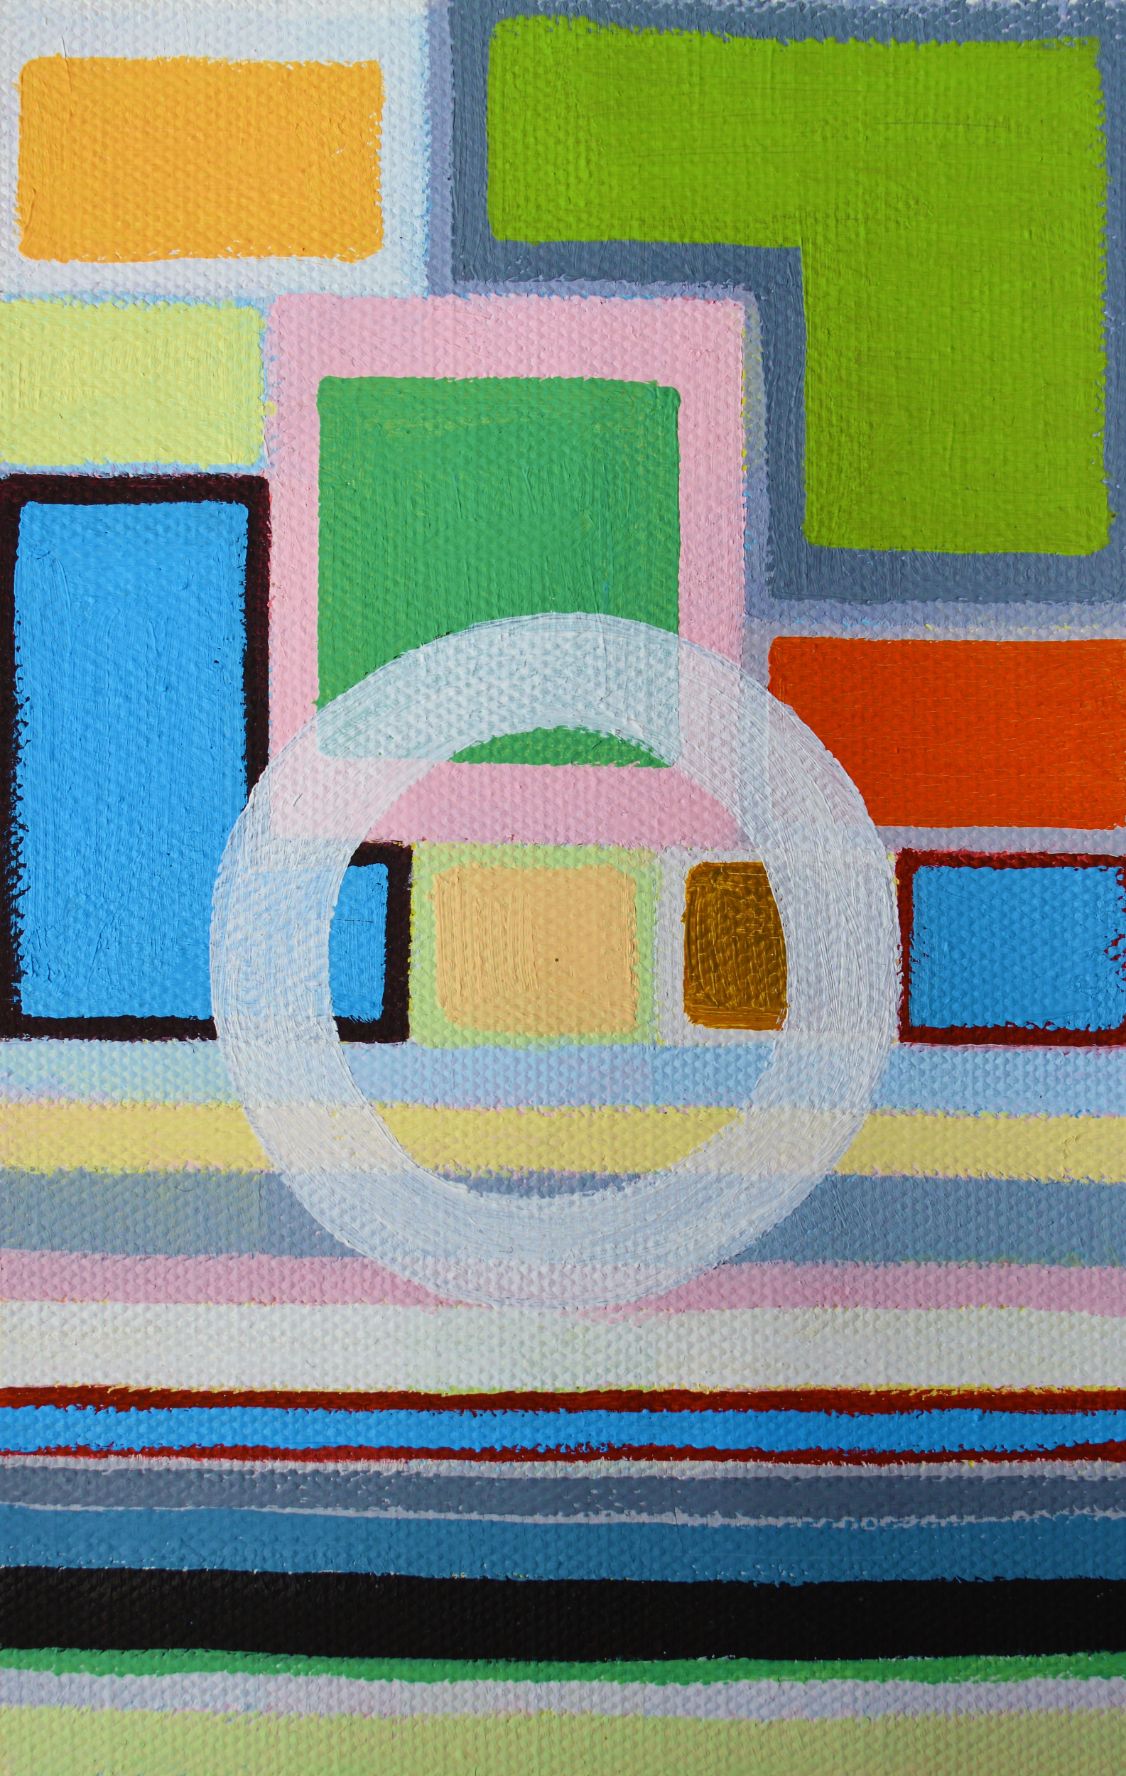 'Patterning # 7' 2020. Oil on canvas.